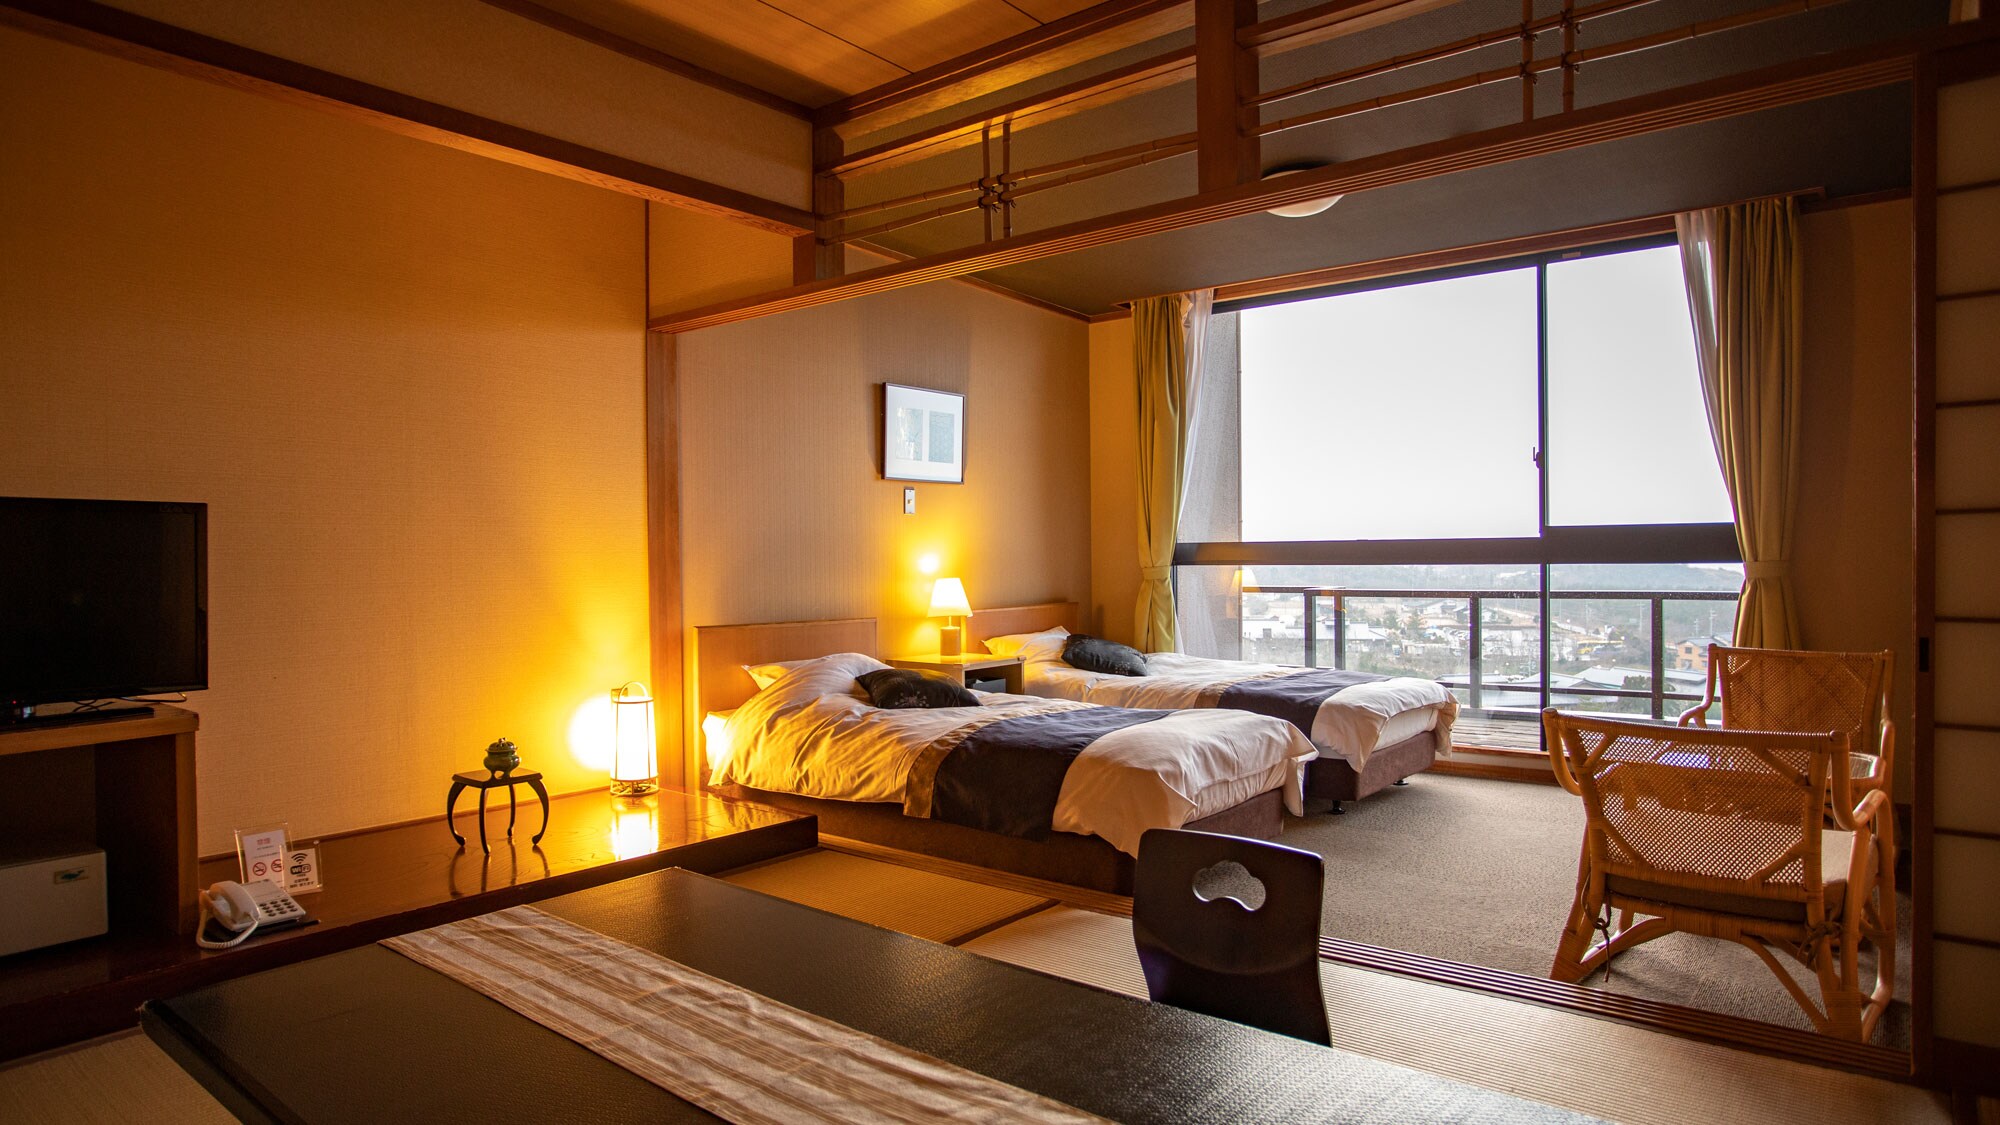 A good choice of hotels and inns. The townscape of Hamazume spreads out from the large windows.